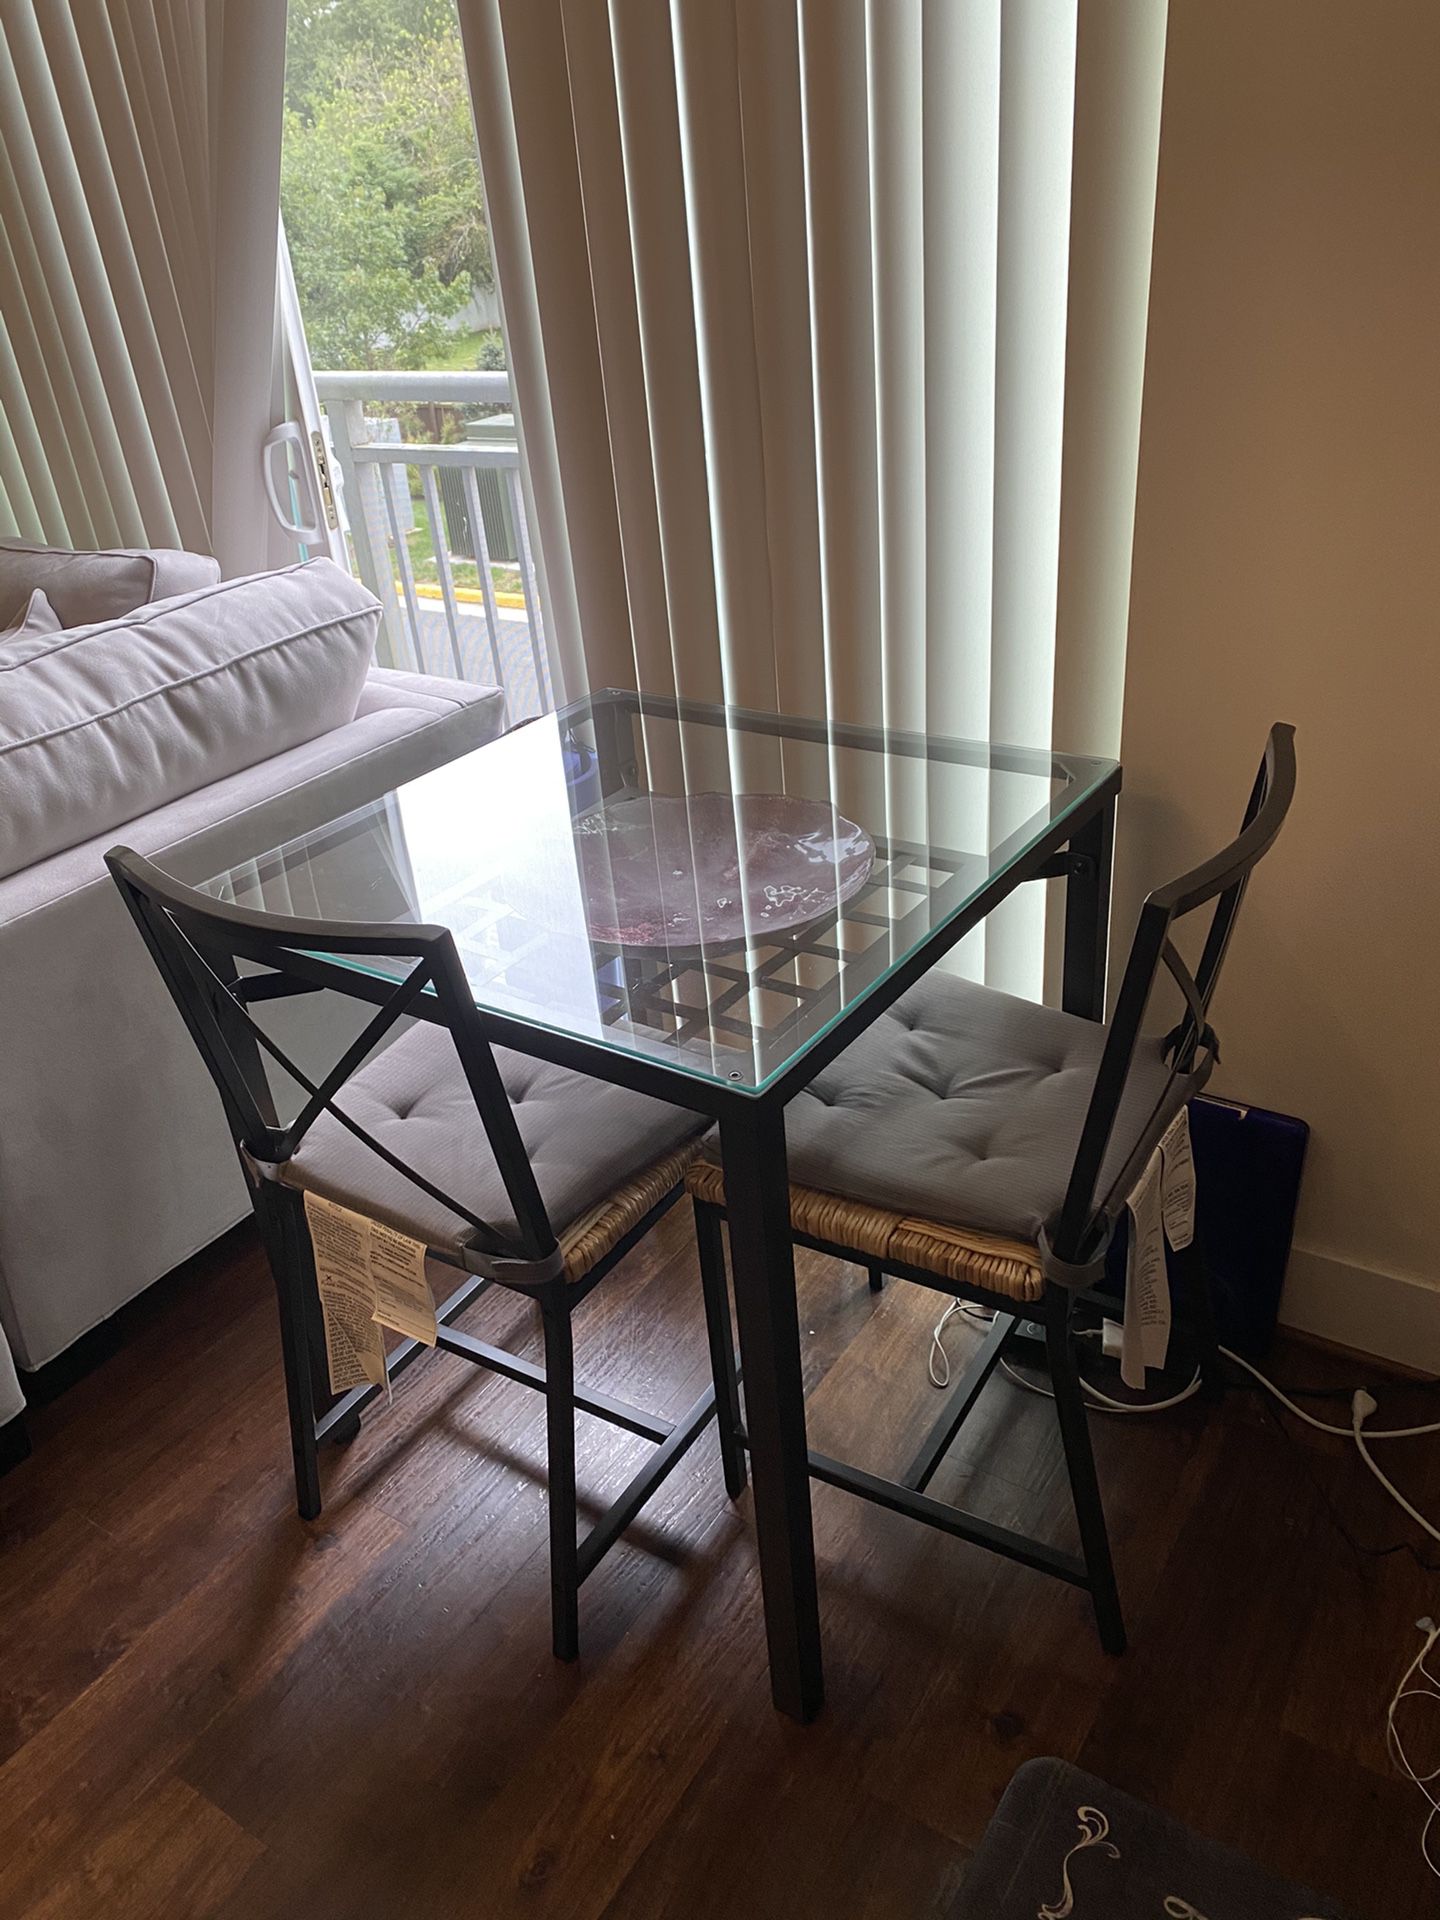 GLASS DINING TABLE FOR SALE!!!